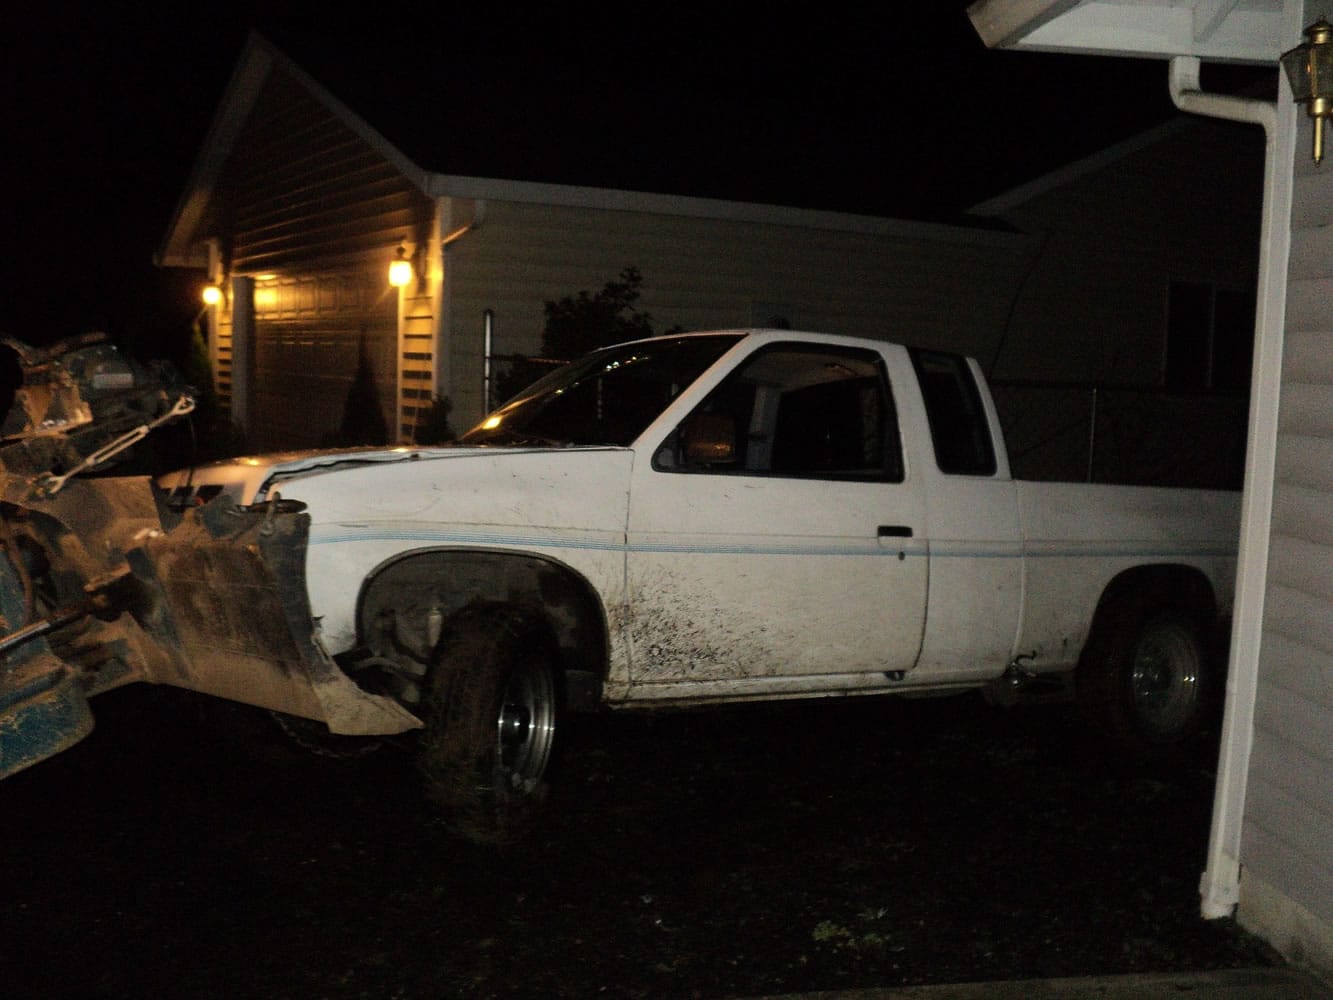 Battle Ground police say this white Nissan truck was reported stolen out of Oregon before it hit vehicles and damaged property in Battle Ground.